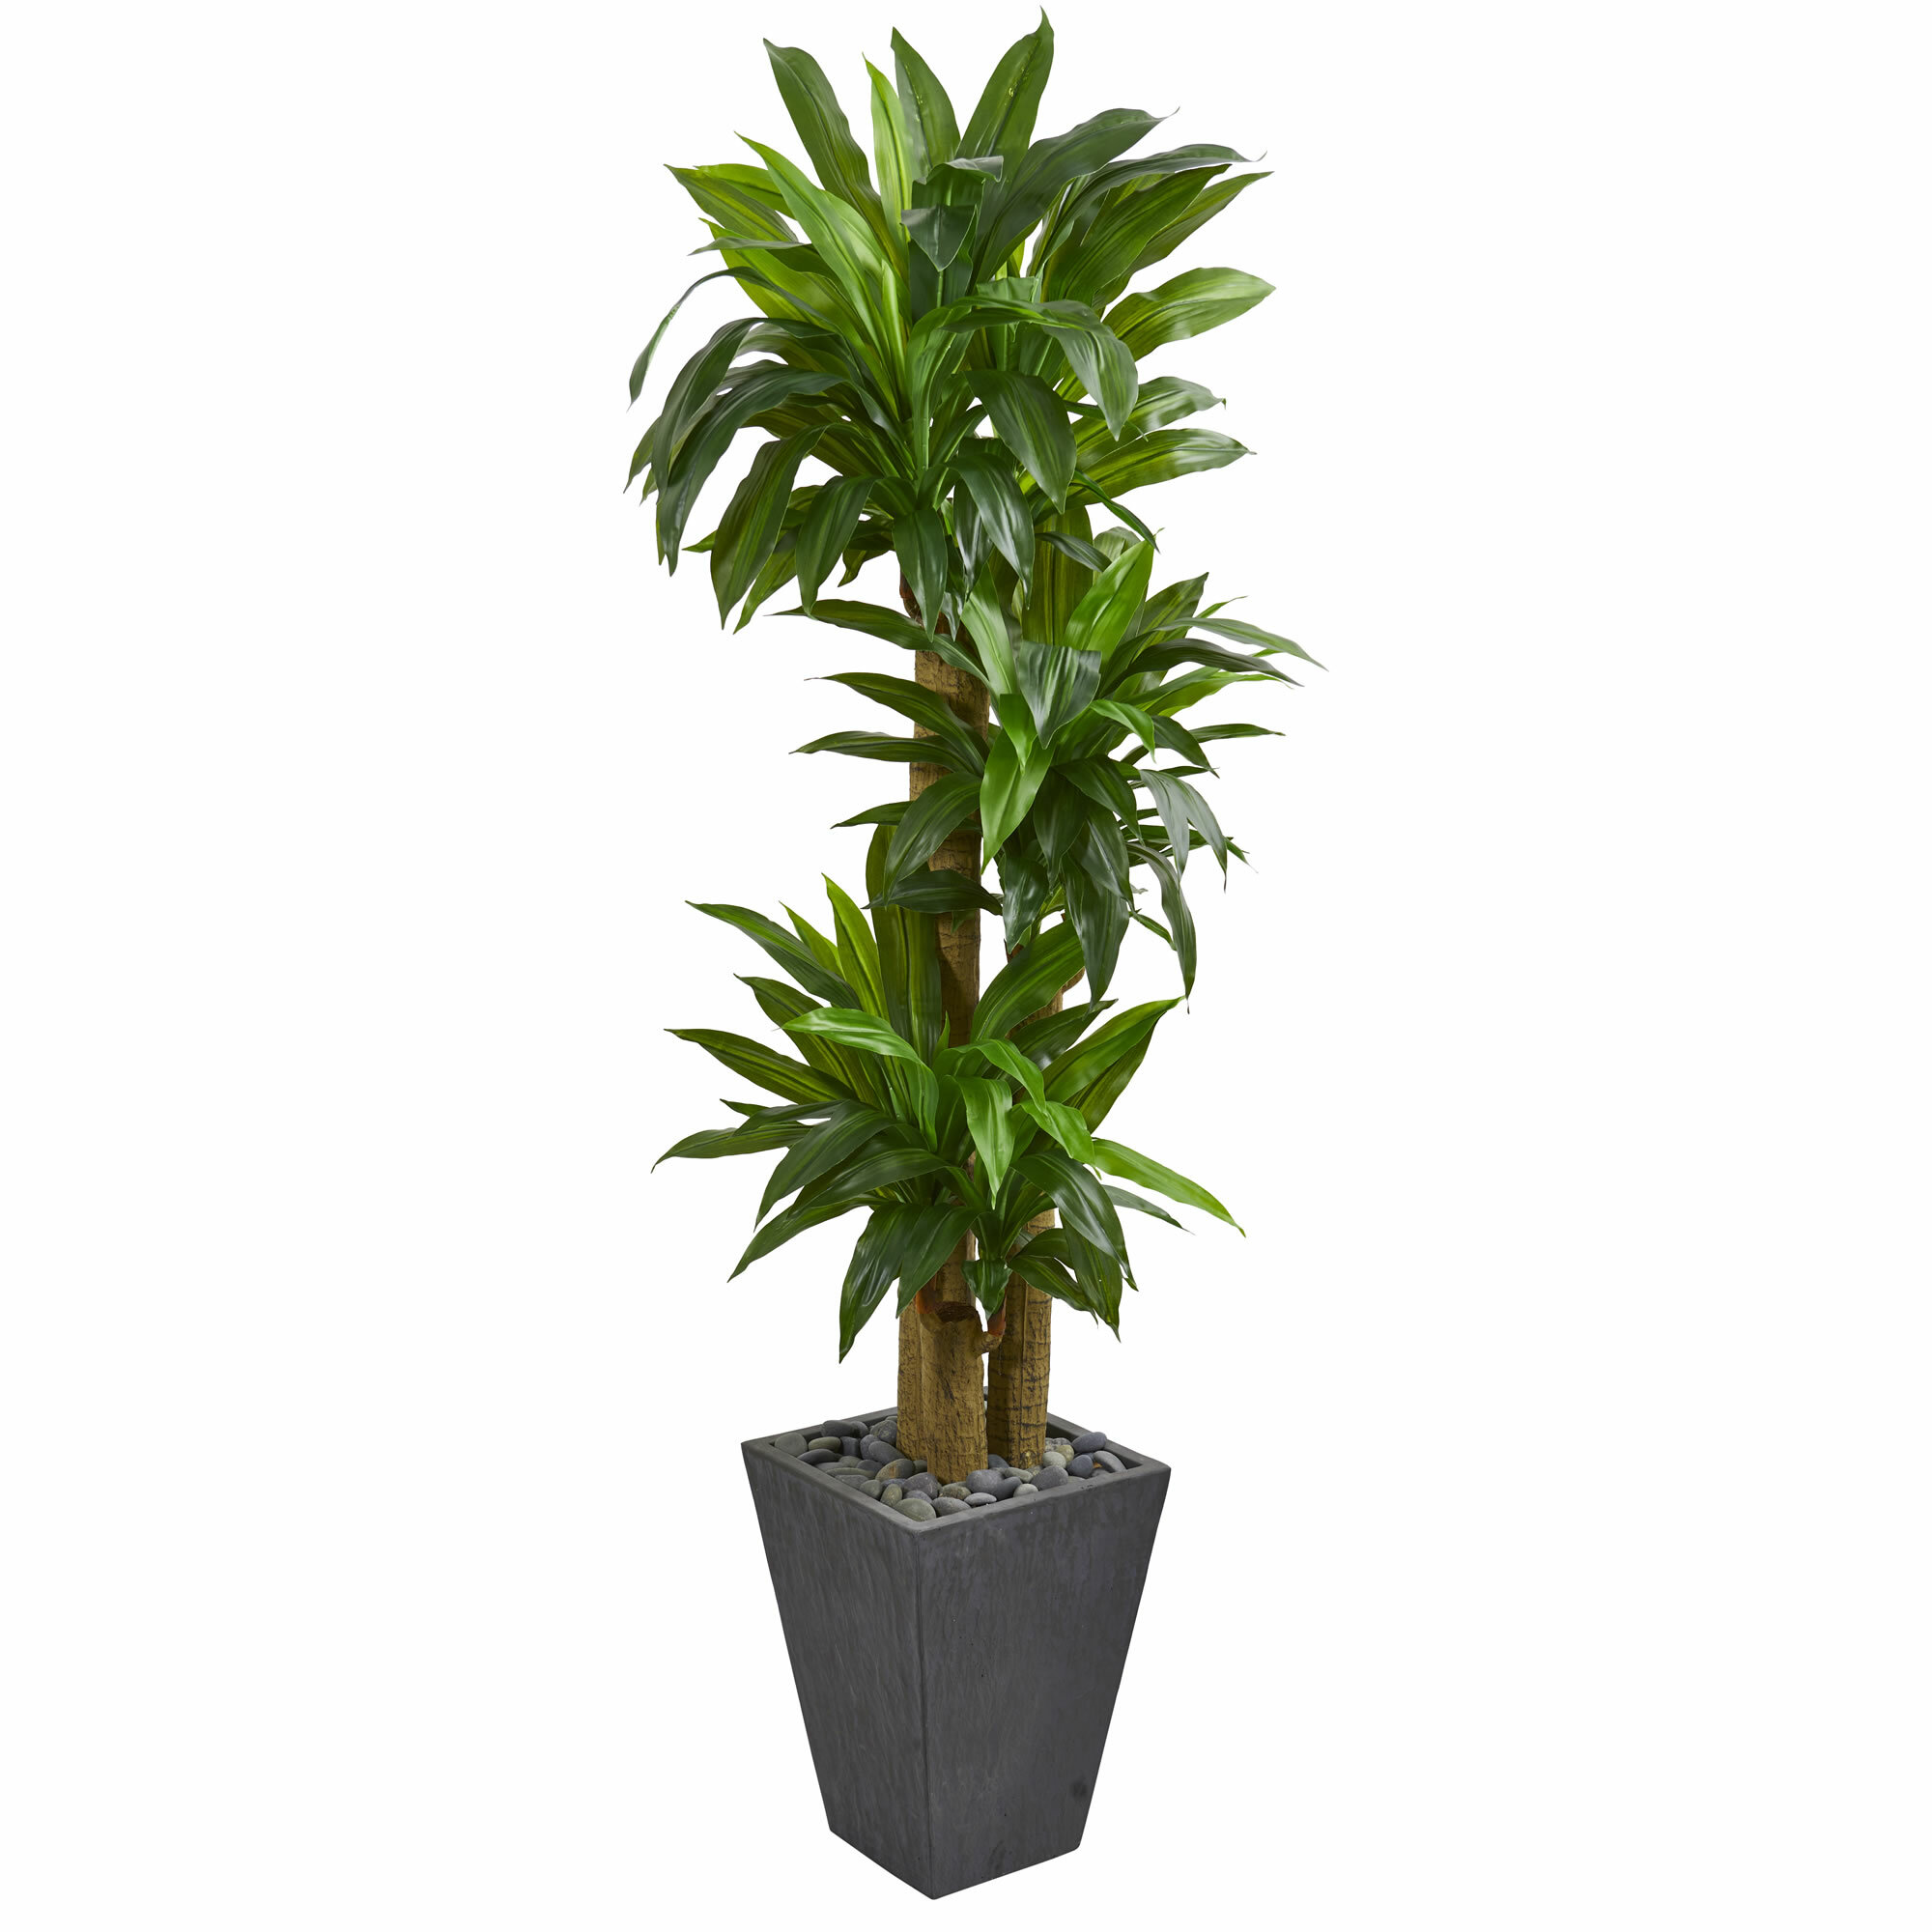 Pot H Green Dracaena Artificial Plant Realistic Look Home Office Decor 48 in